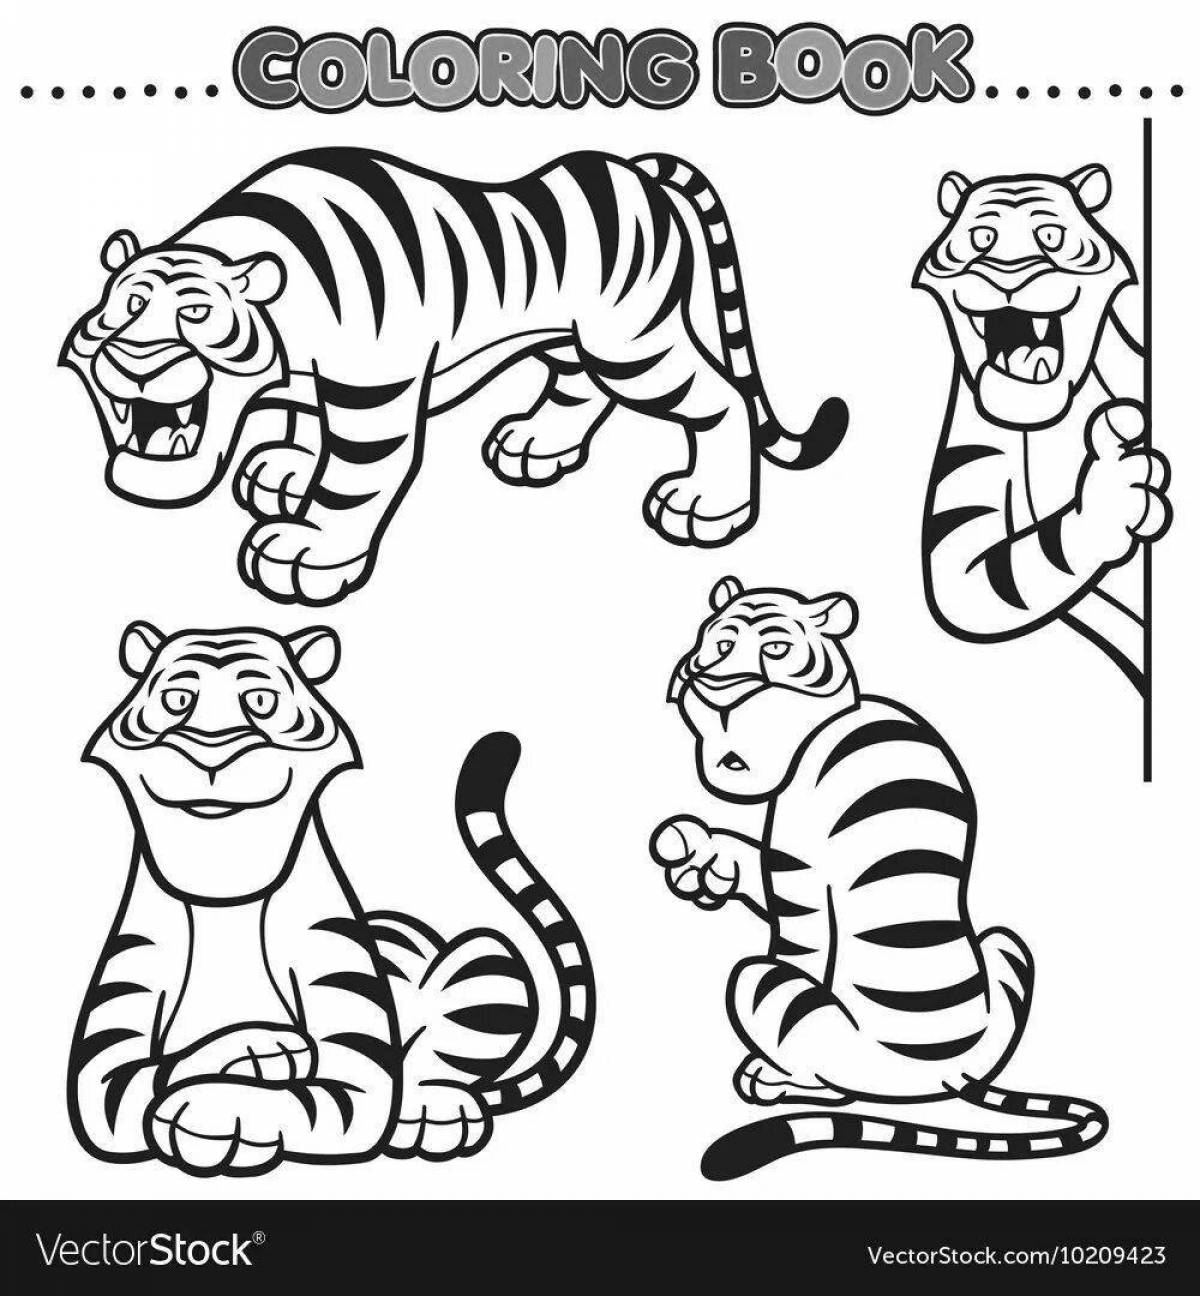 Coloring book happy tiger family